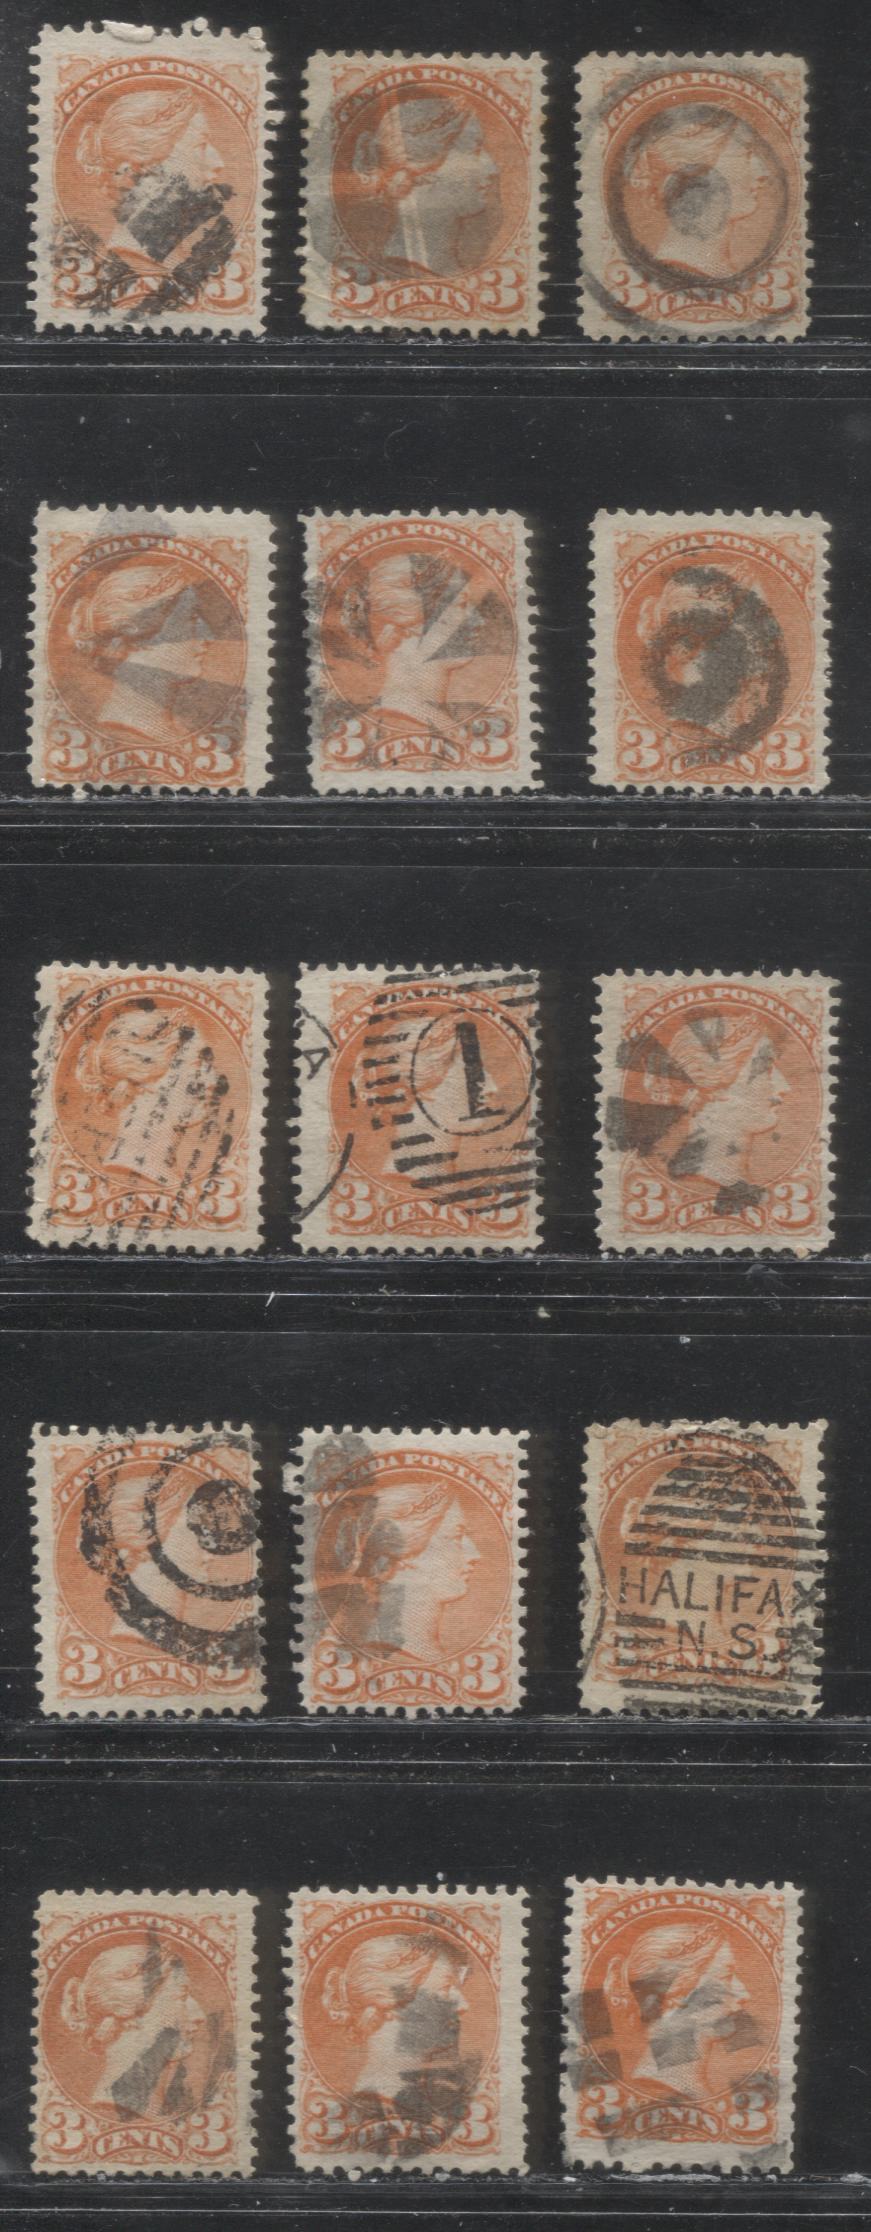 Lot 263 Canada #37, 37c 3c Dull Orange Red, Orange Red, Red Orange & Bright Orange Queen Victoria, 1870-1897 Small Queen Issue, A Group of Fine Used Examples Montreal, Various Perfs, Horizontal Wove, Showing a Range of Shades